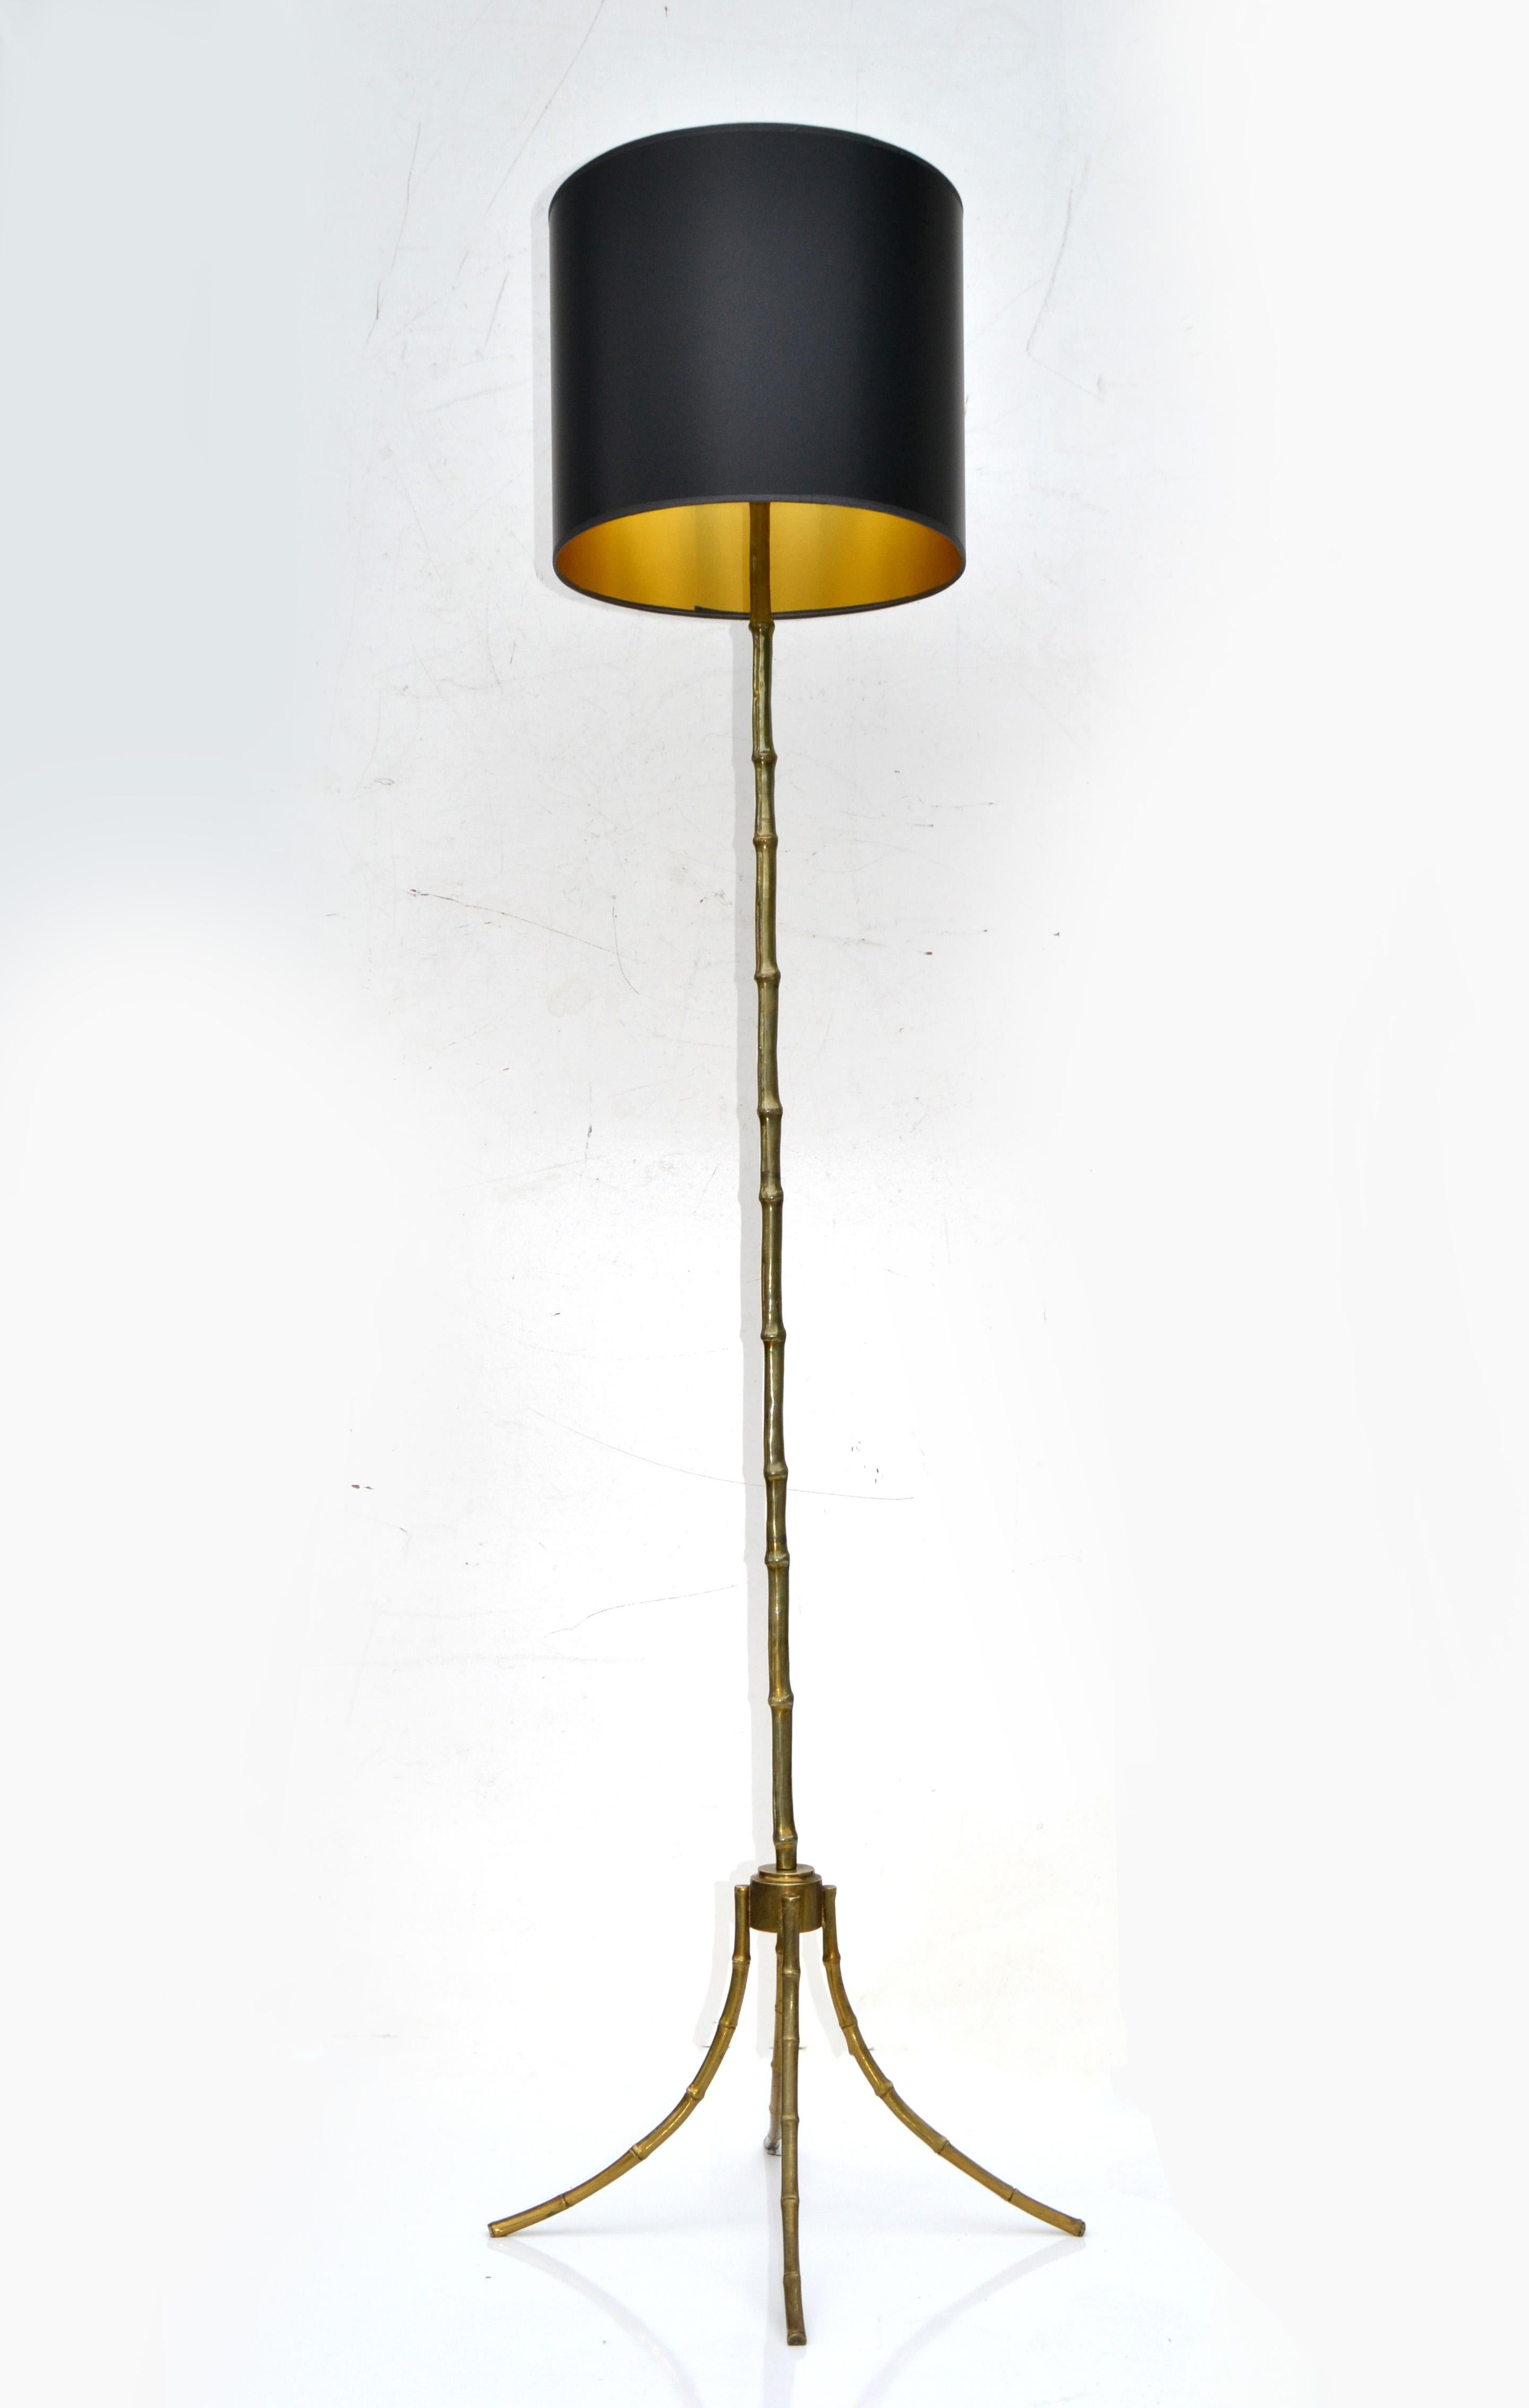 Floor lamp by Maison Baguès in solid bronze Faux Bamboo very heavy, high quality.
French Neoclassical Lamp made in the 1950.
US rewired, working condition each lamp takes one socket 100 watts max. or LED bulb.
Sold with black & gold clip on paper